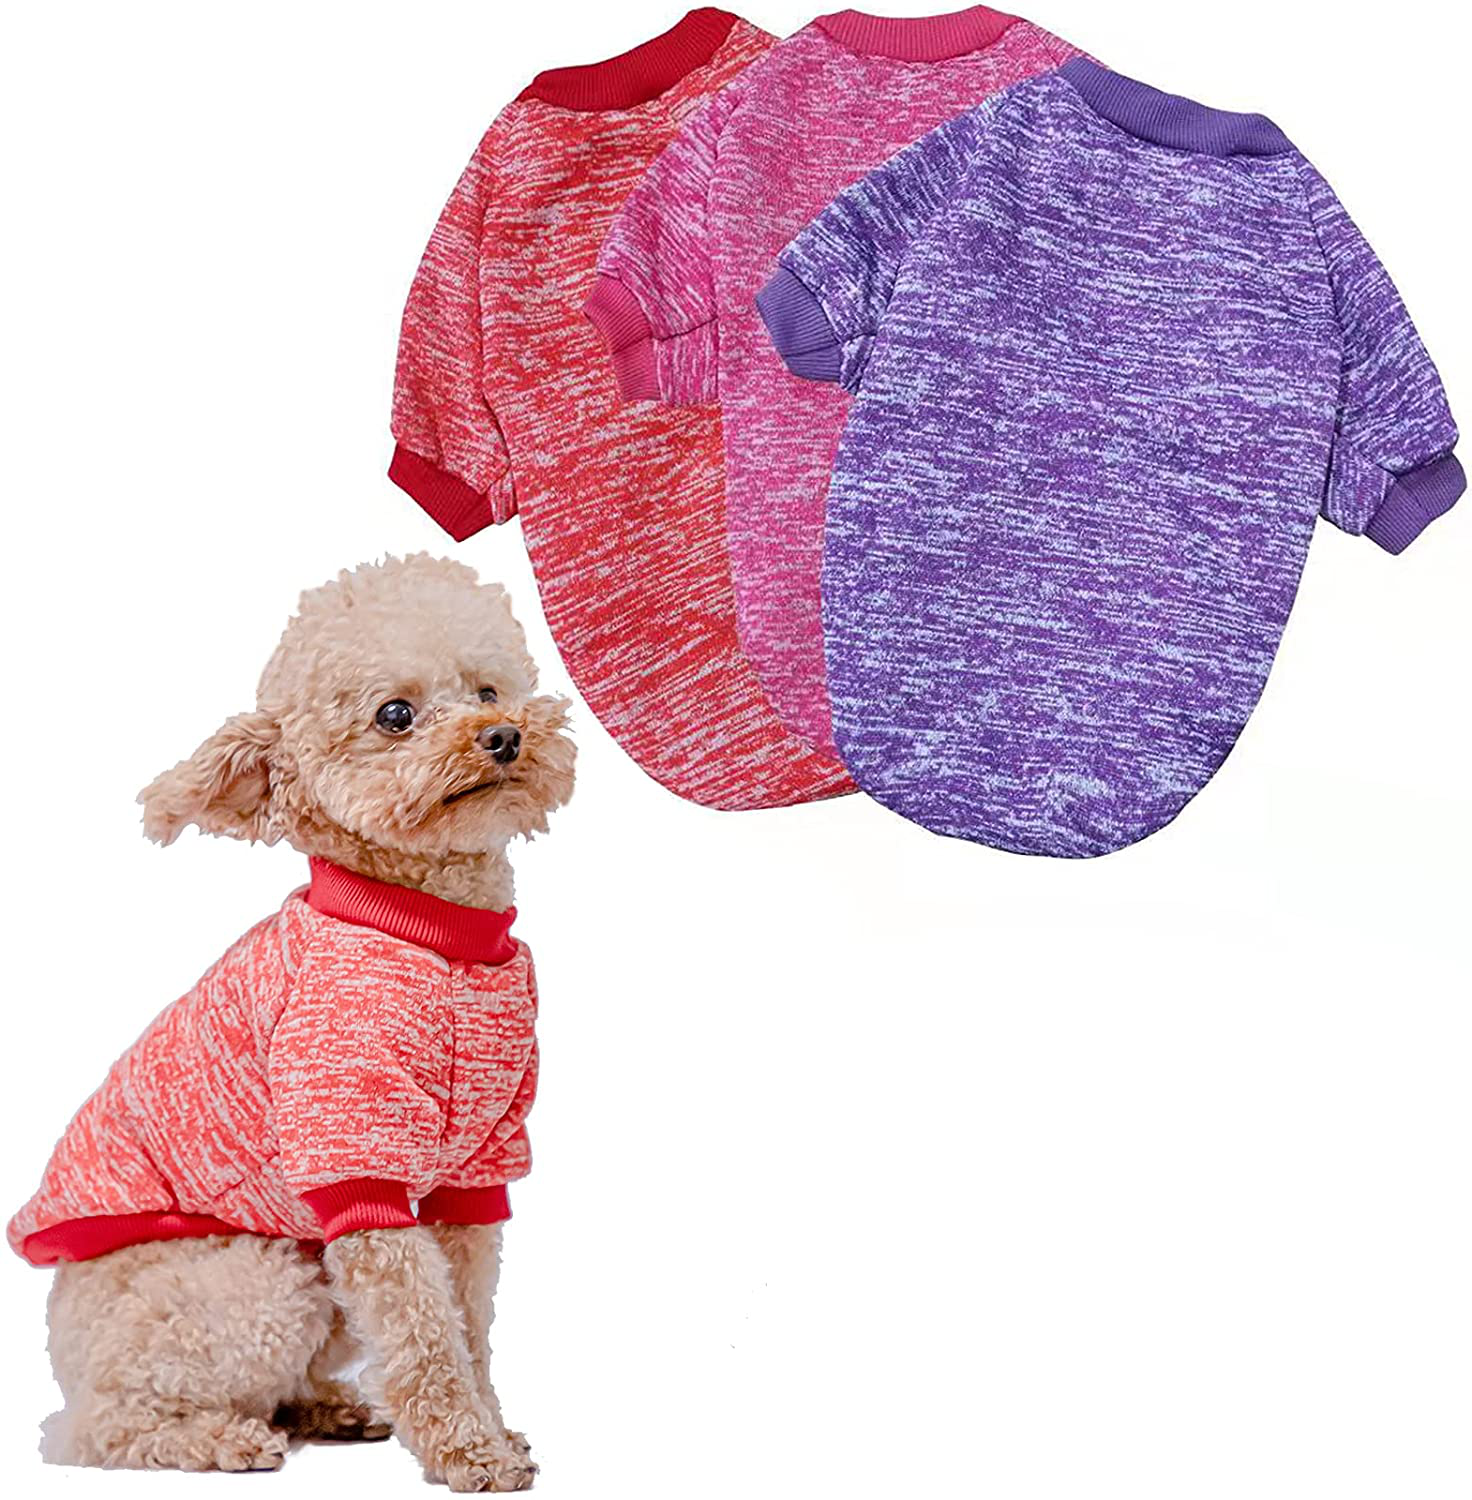 Pack of 3 Dog Hoodies Knitwear Dog Sweaters Stretchy Pet Clothes Soft Puppy Pullover Cat Hooded Shirts Casual Dog Sweatshirts for Small Dogs Cats Warm Dog Shirts Winter Puppy Sweater Animals & Pet Supplies > Pet Supplies > Cat Supplies > Cat Apparel K ERATISNIK Bright Colors Medium 